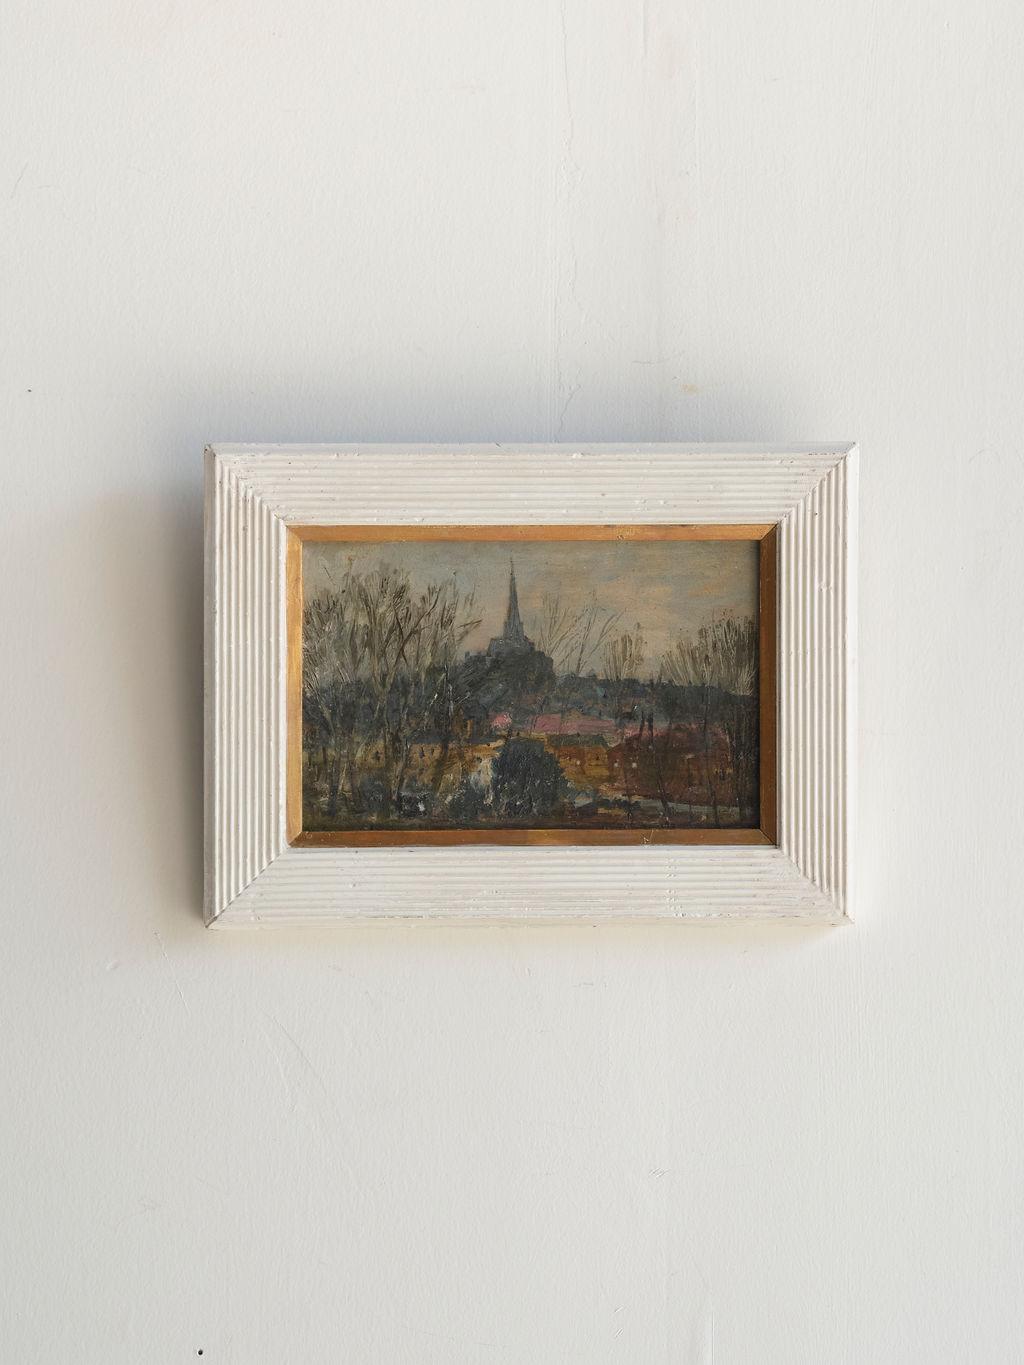 A lovely 20th century oil painting of an English landscape with a church in the background. The contrast of the muted colors of the painting and the bright white frame really make this piece of art stand out. The frame has white ribs on every side